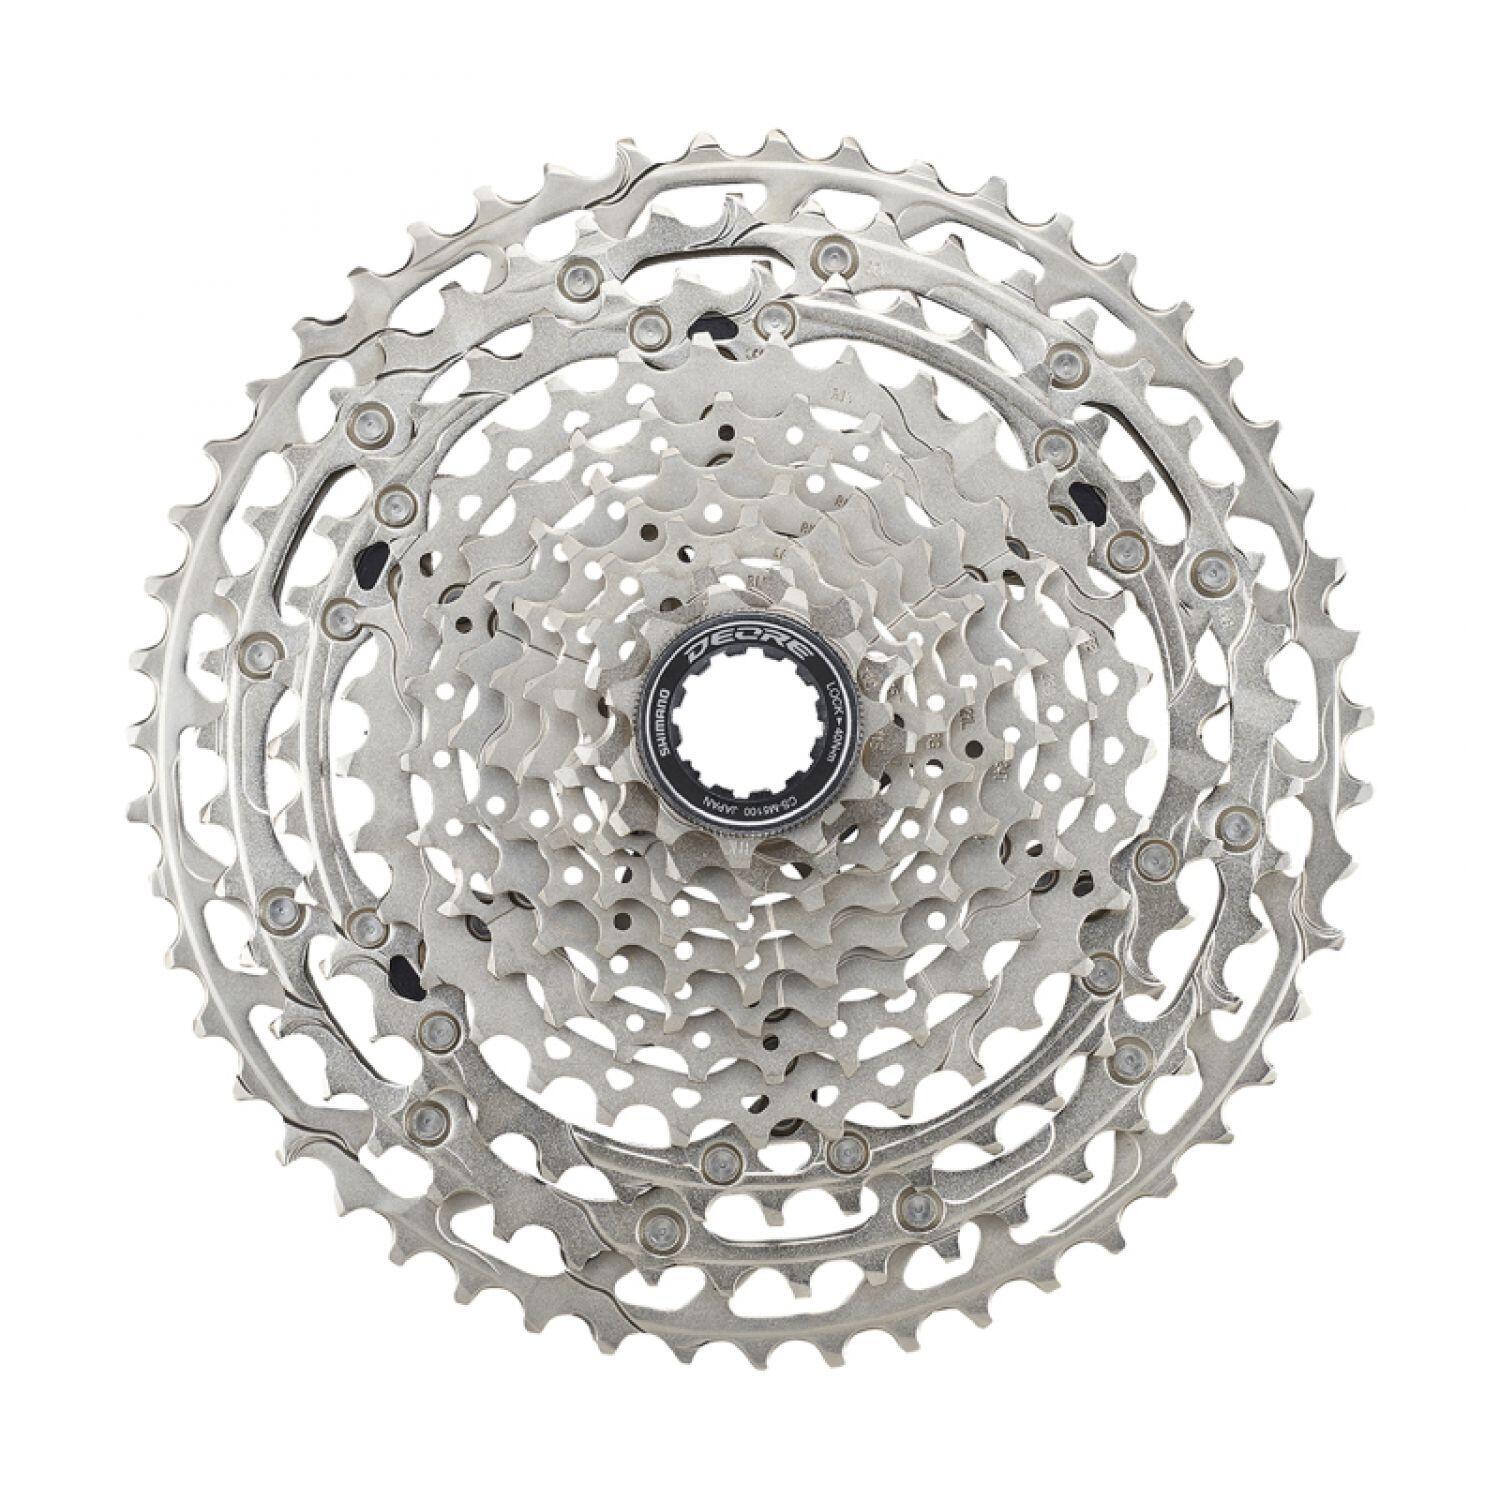 Shimano Deore M5100 11 speed Cassette 11-51T 1/2